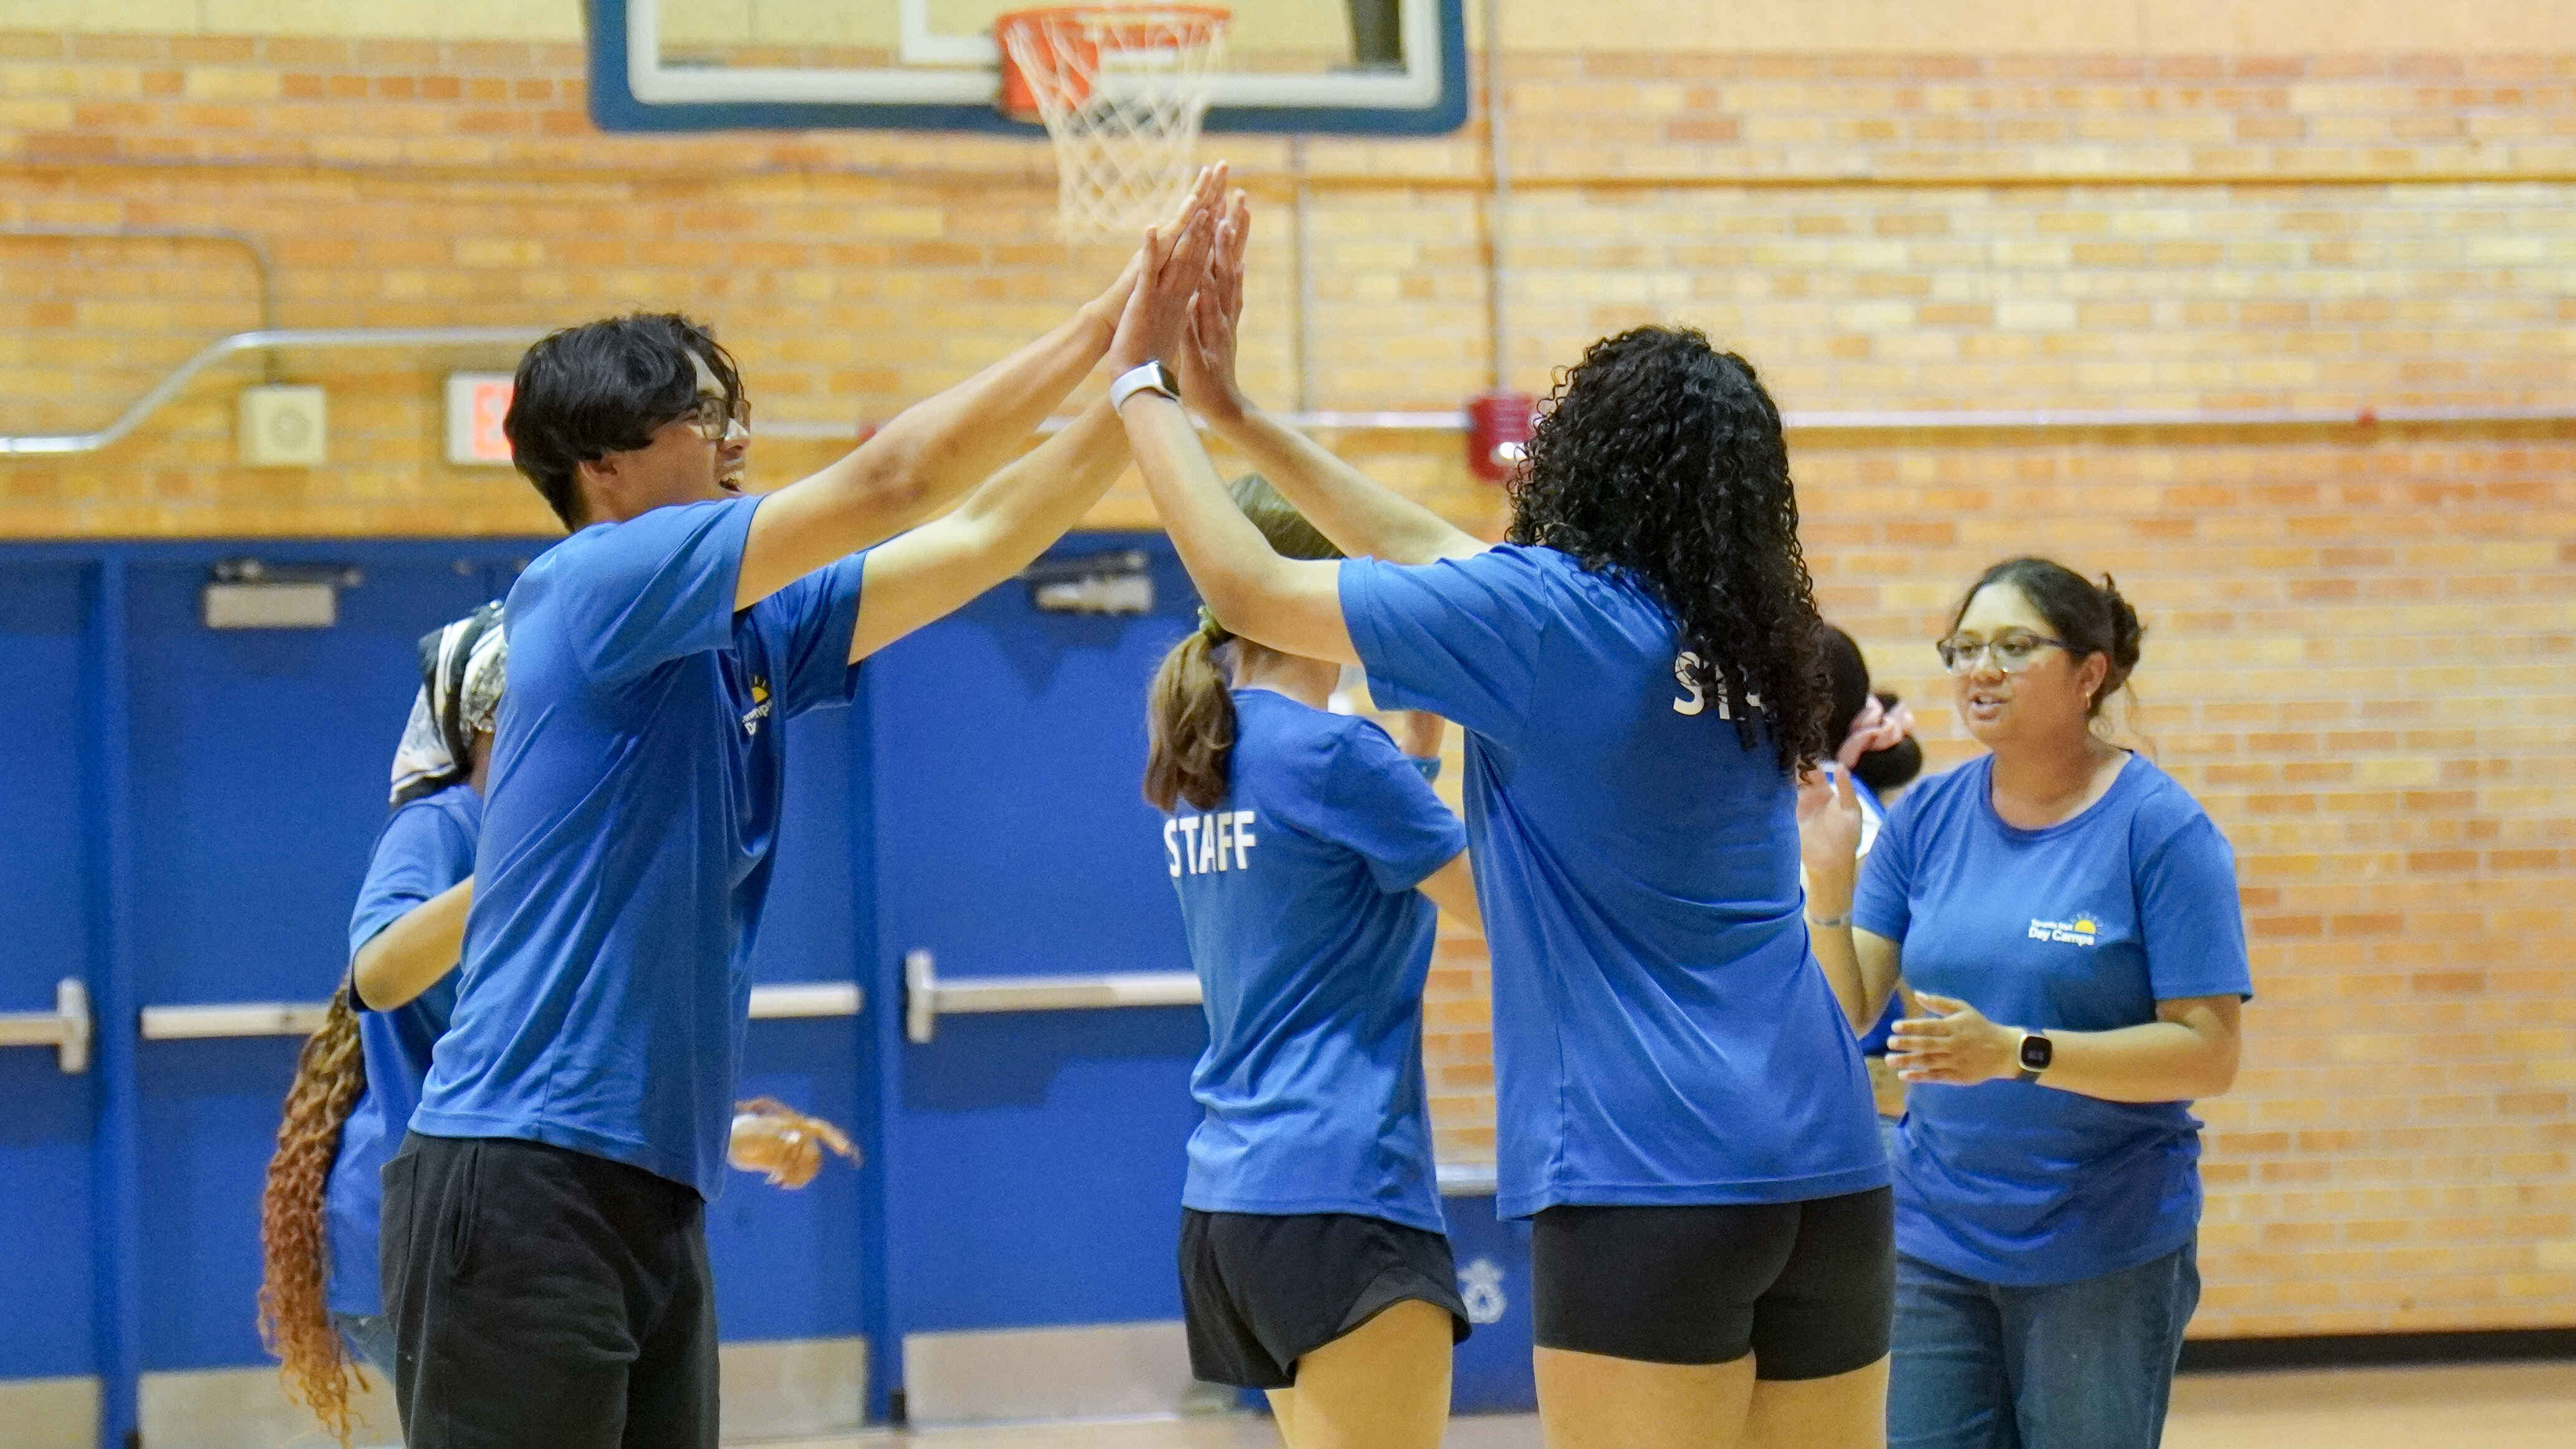 A group of Camp Counsellors share high fives in a gymnasium